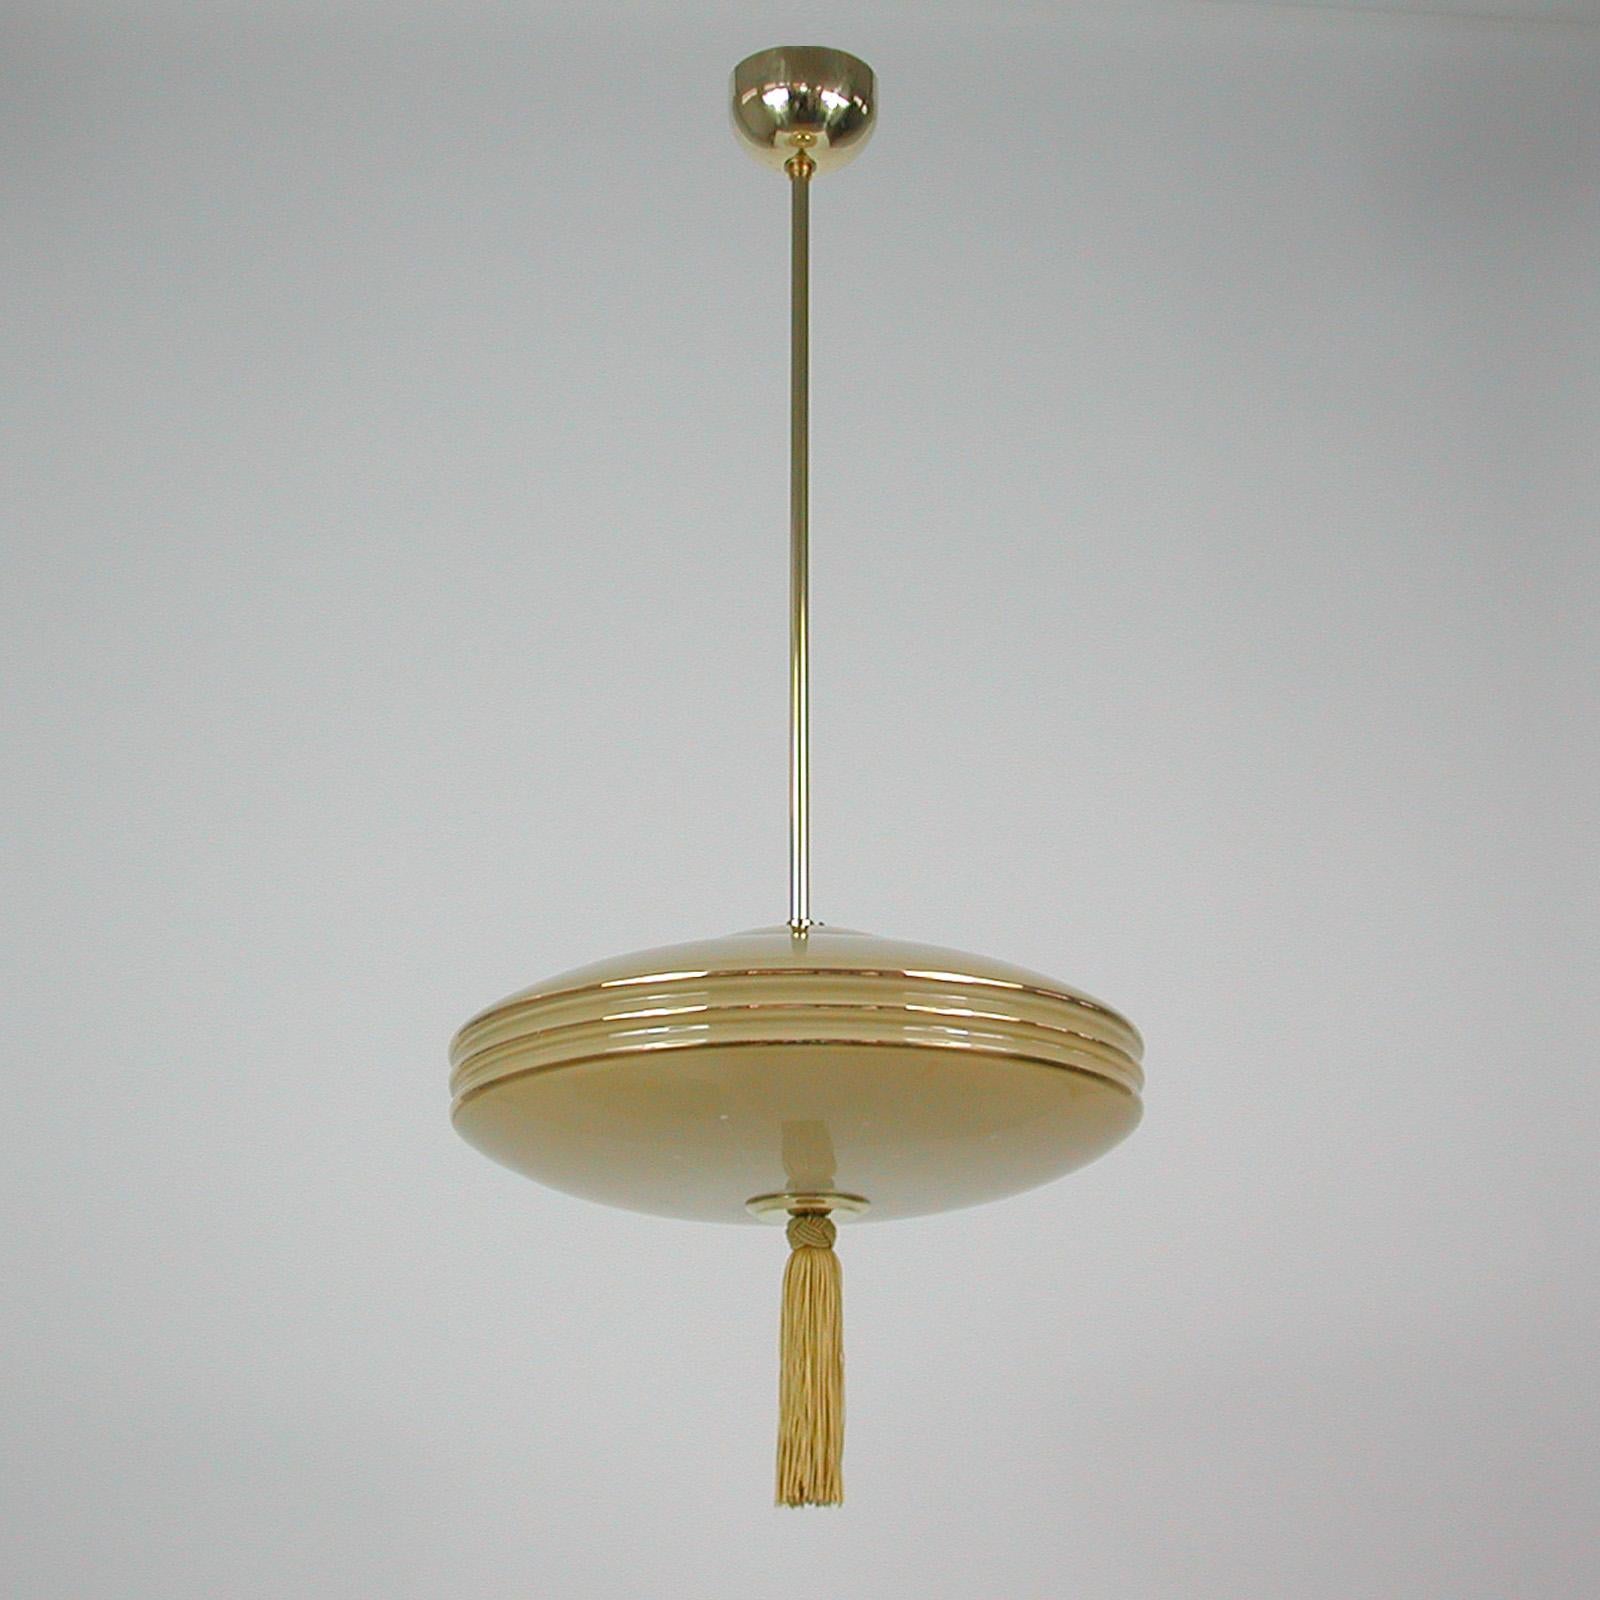 This unusual fixture was designed and manufactured in Germany in the 1930s during the Bauhaus period.
It features an ivory colored glass lampshade, a bronze silk tassel and brass hardware.

The light has been rewired and requires one E27 bulb.